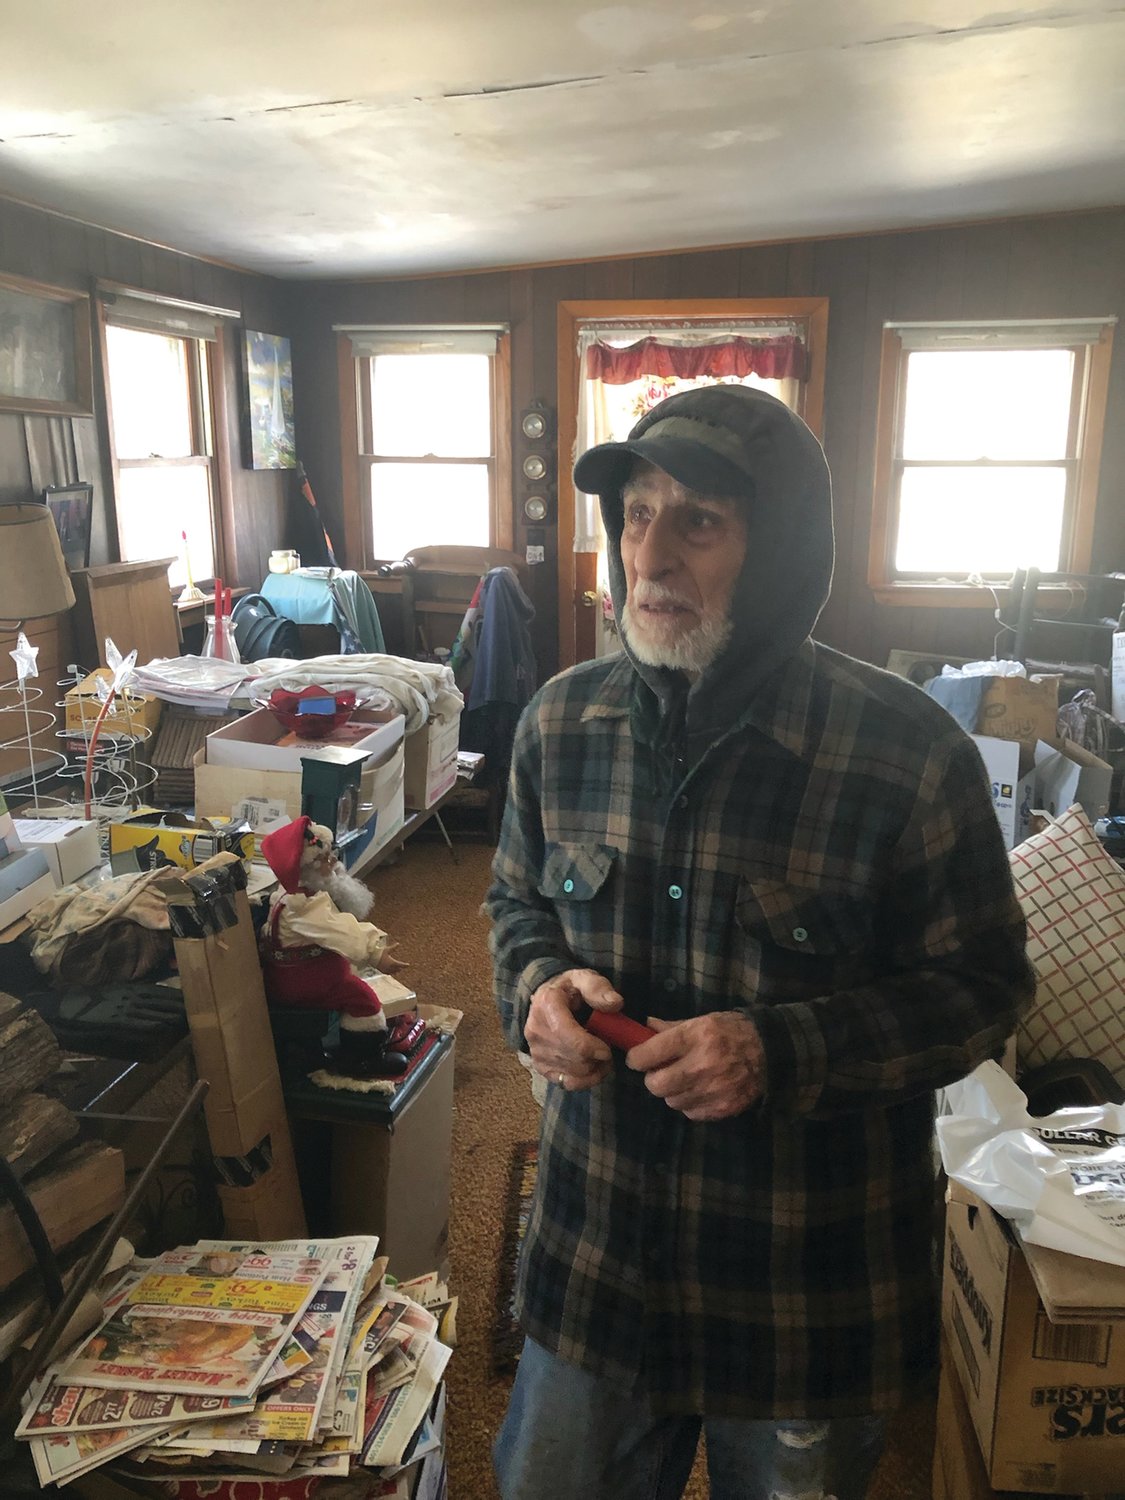 NEARLY LOST: When a tree fell on 91-year-old Korean War veteran Bernie Pavia’s home last Christmas, he nearly lost everything as snow melted and saturated the walls, ceilings and all his possessions.